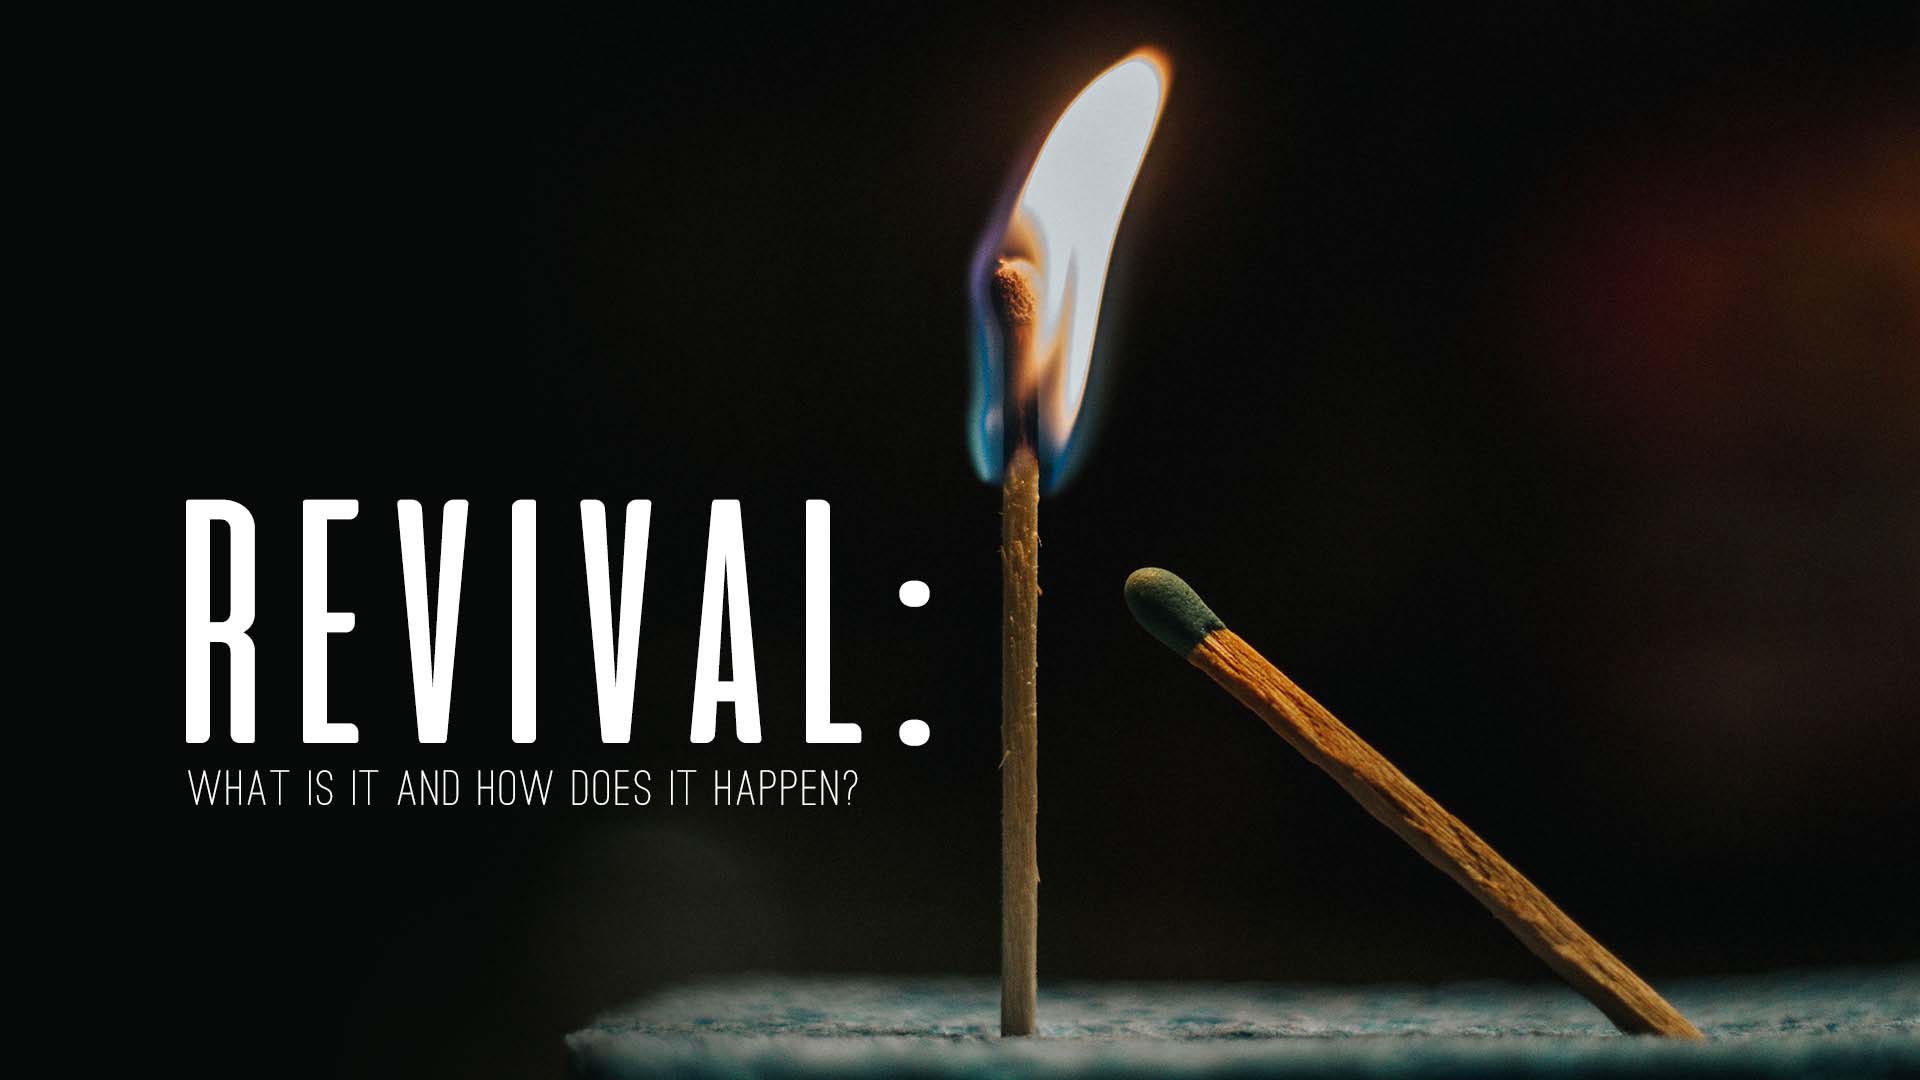 Revival: What Is It and How Does It Happen?